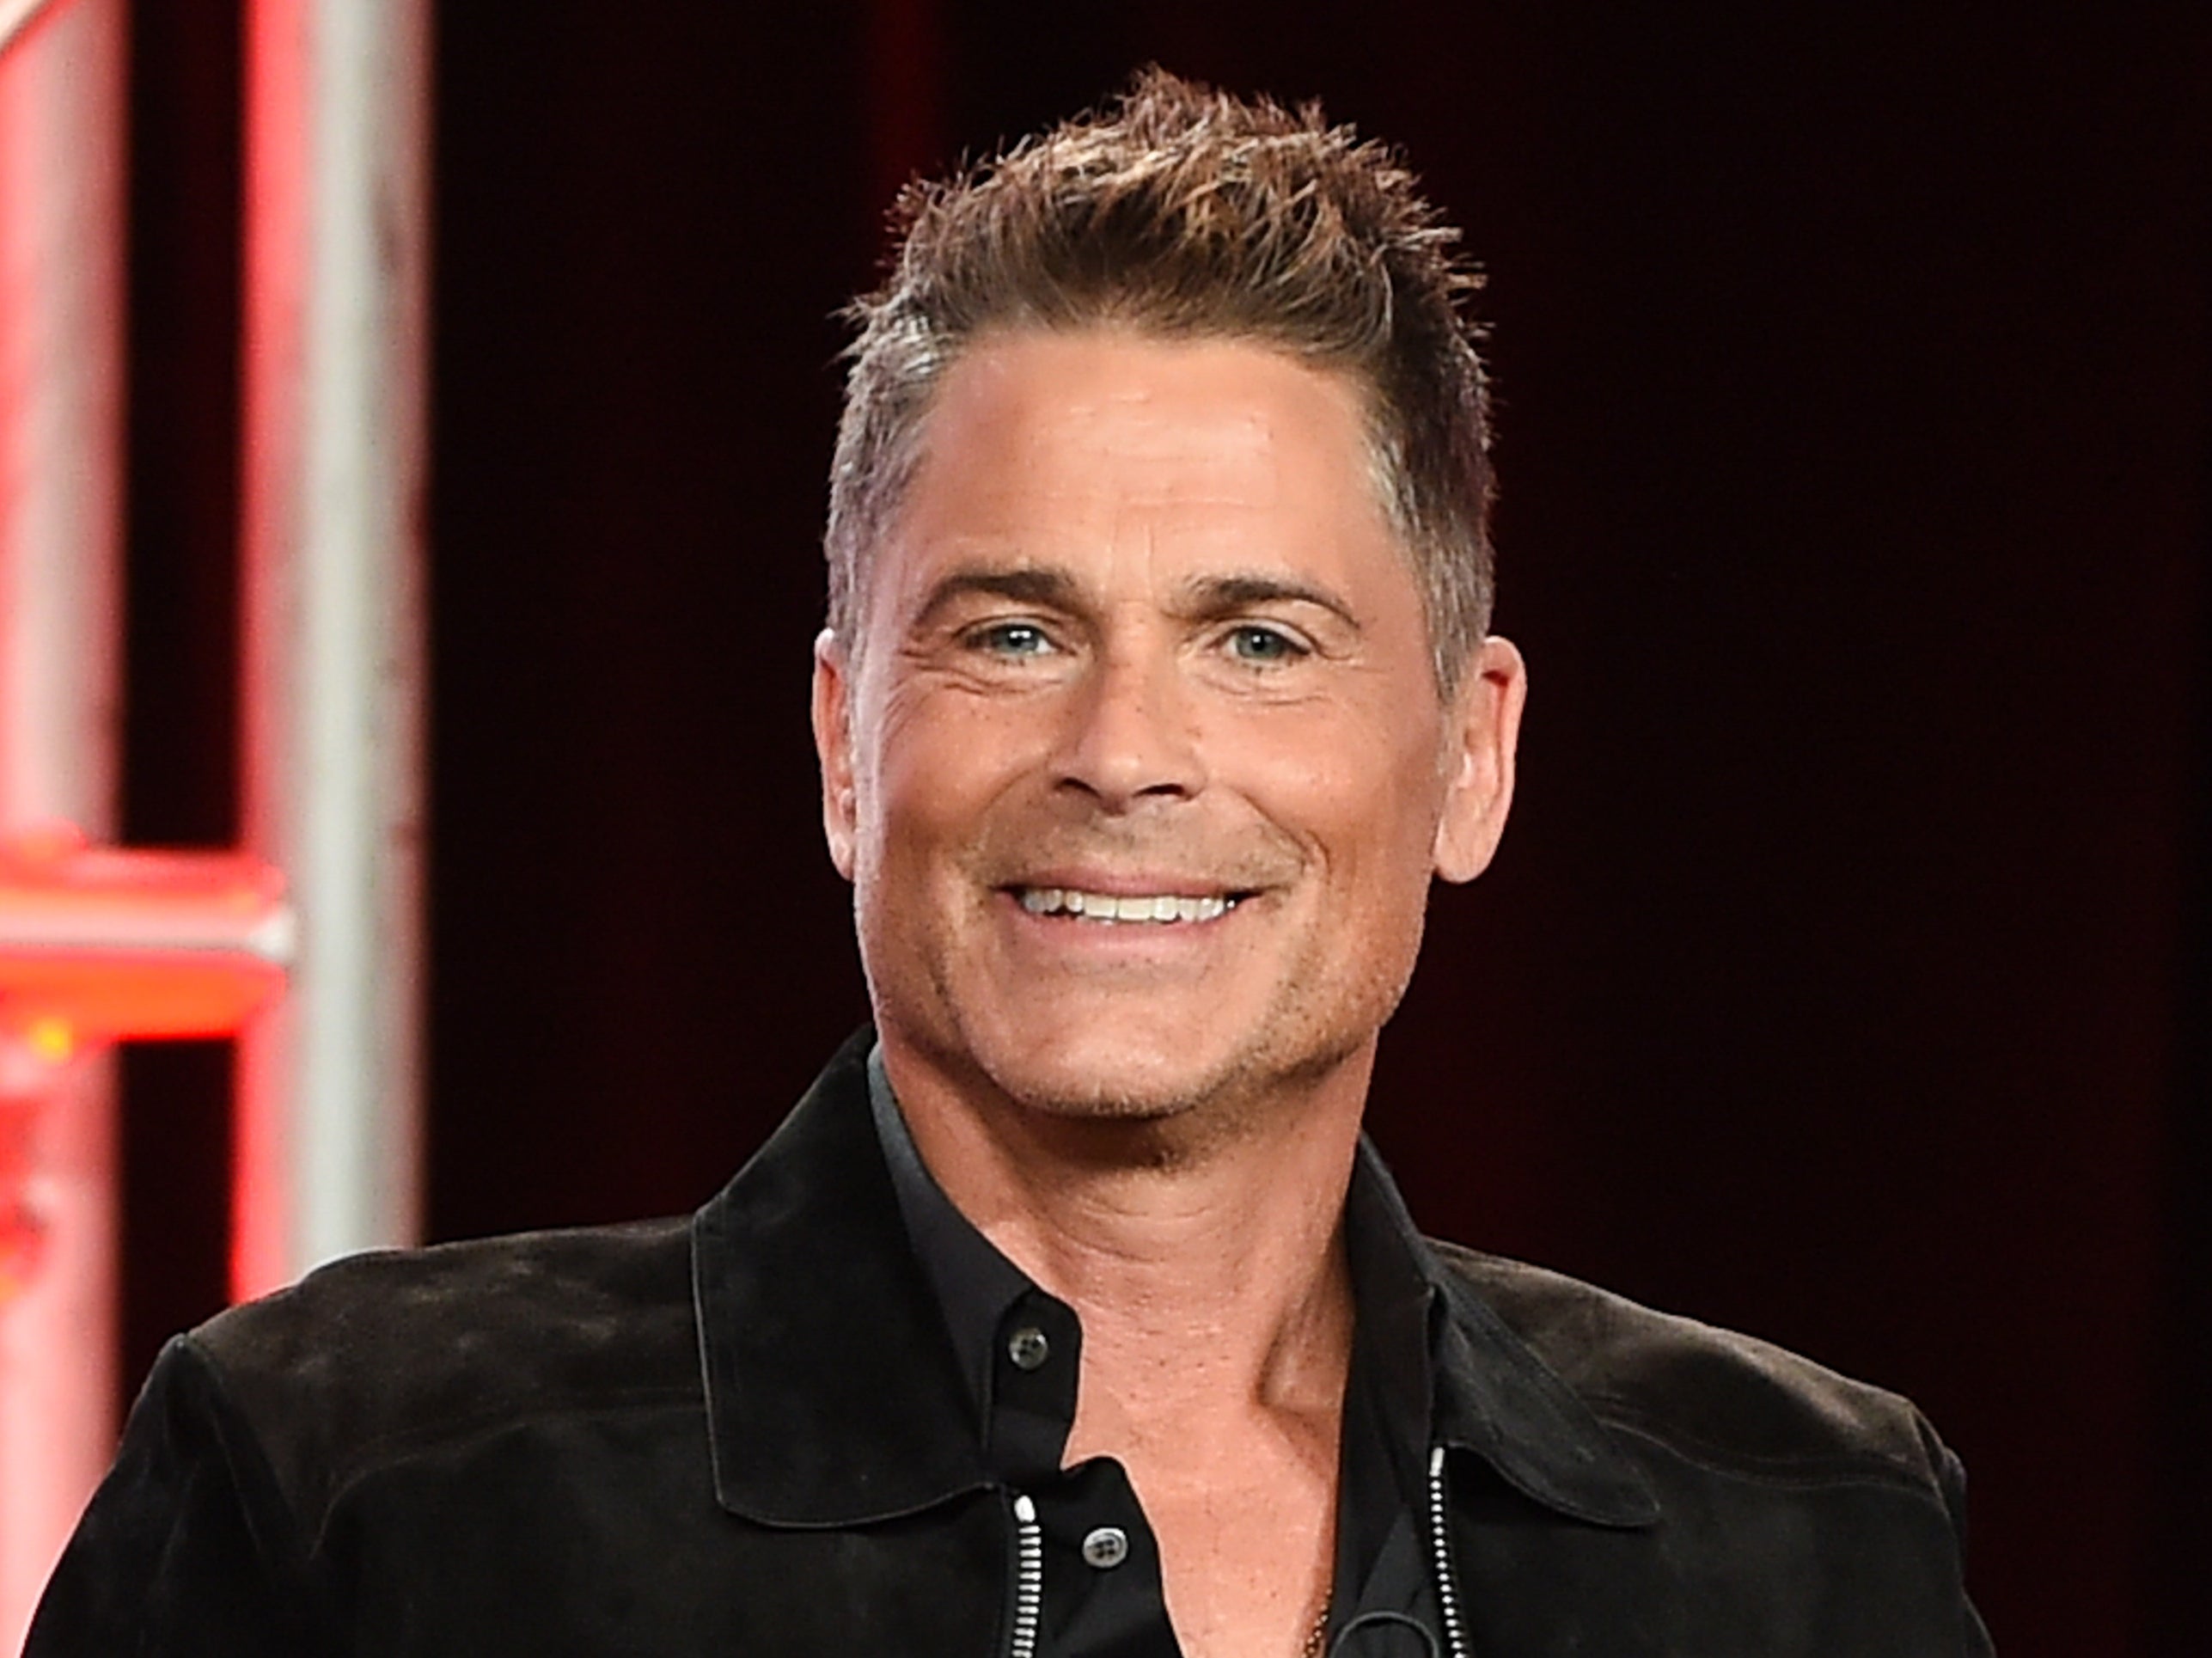 Rob Lowe recalls the constant presence of cocaine on Eighties film sets